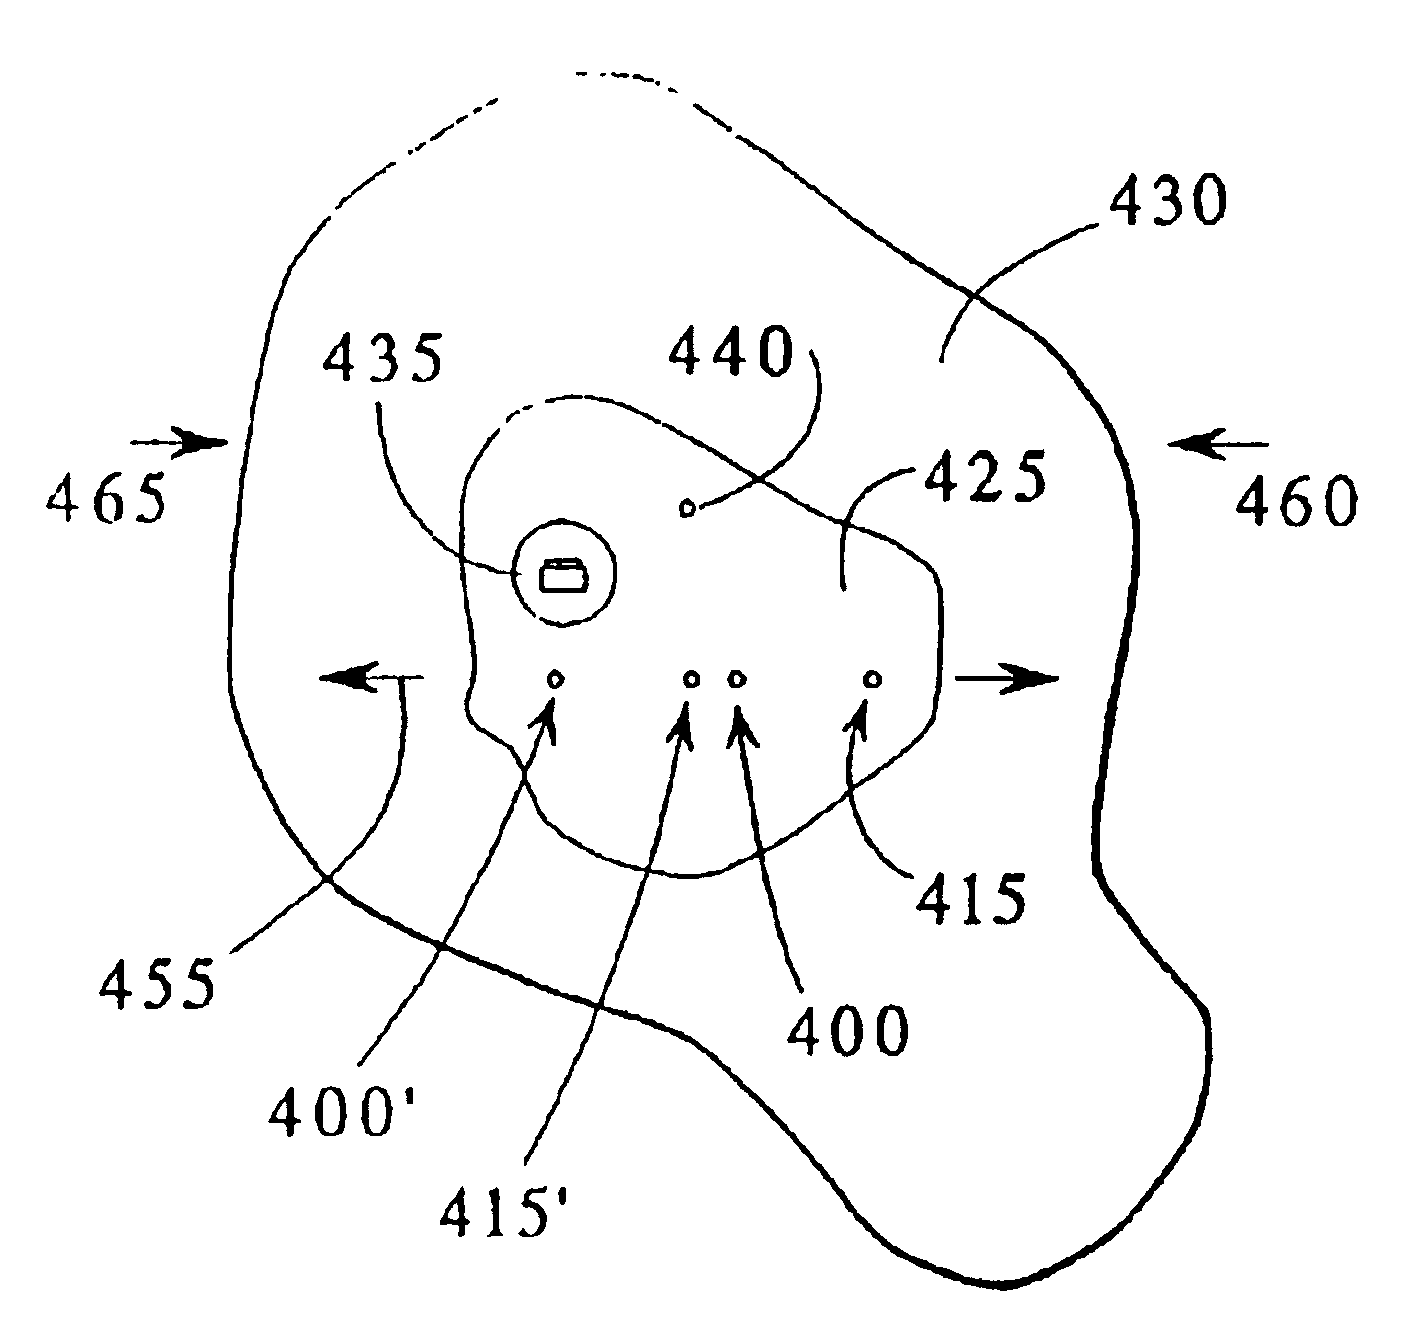 Hearing aid having second order directional response